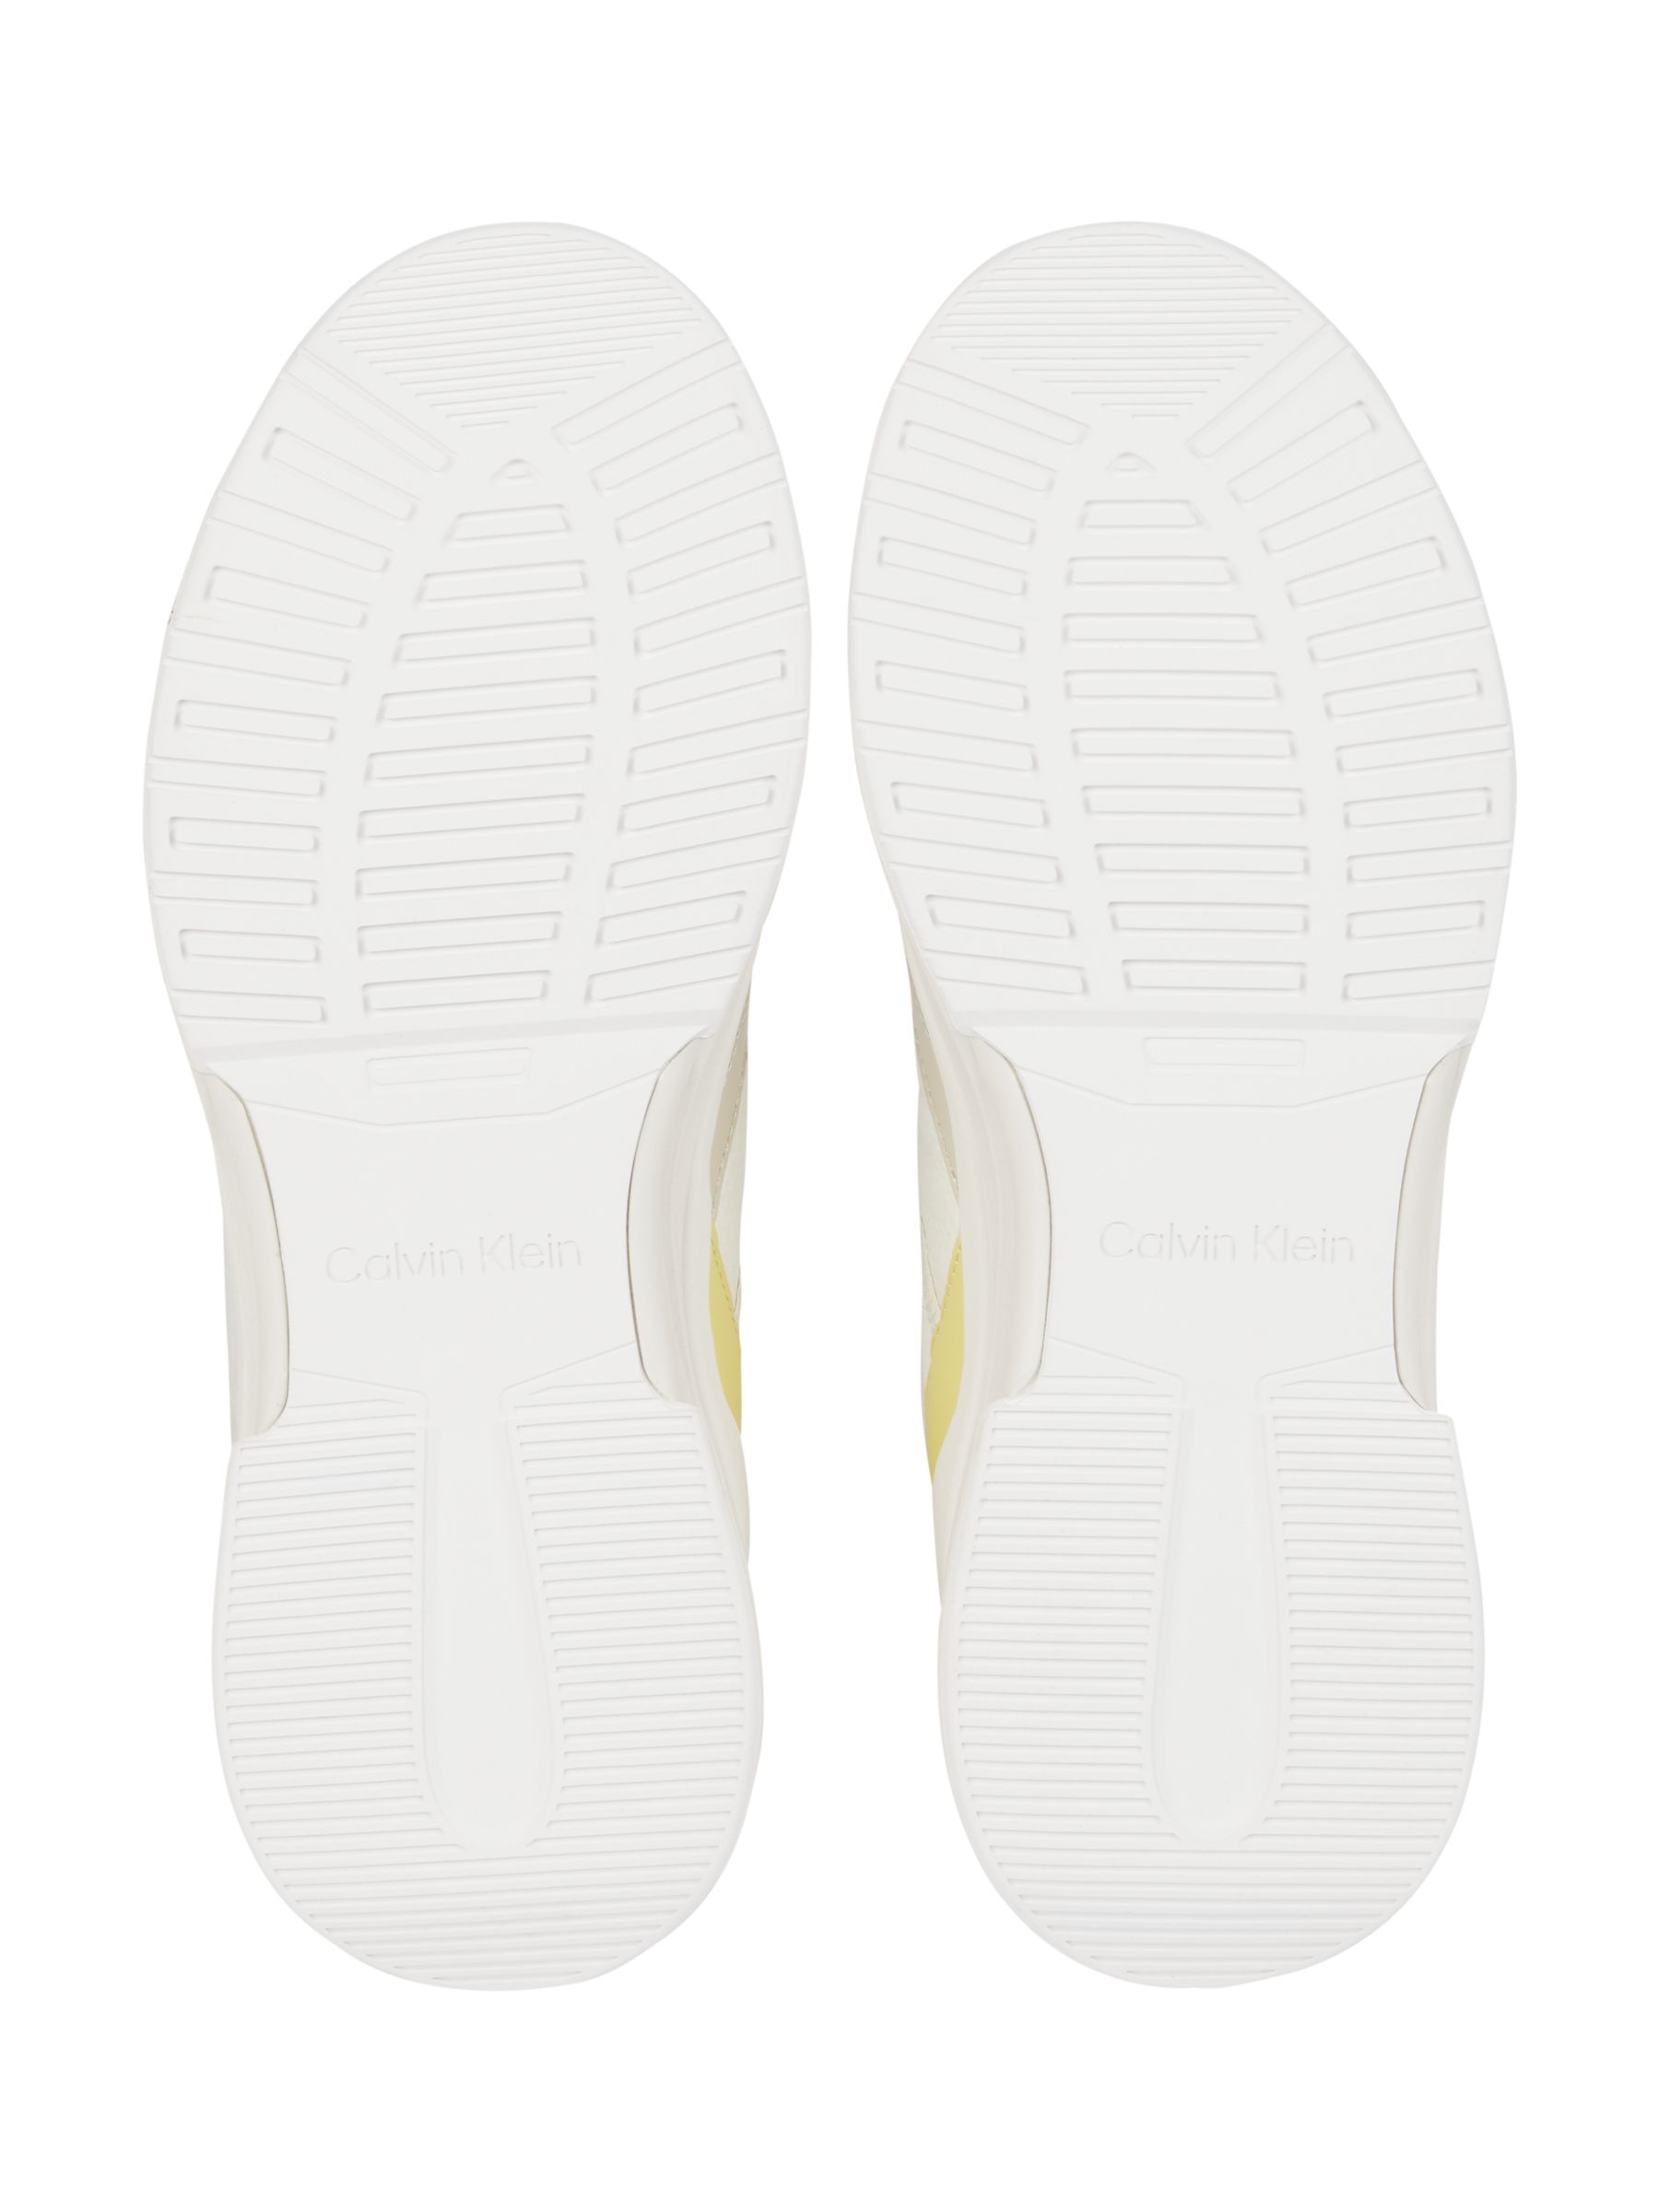 Buy Calvin Klein Leather Low Top Chunky Heel Trainers, Marshmallow/Acacia Online at johnlewis.com